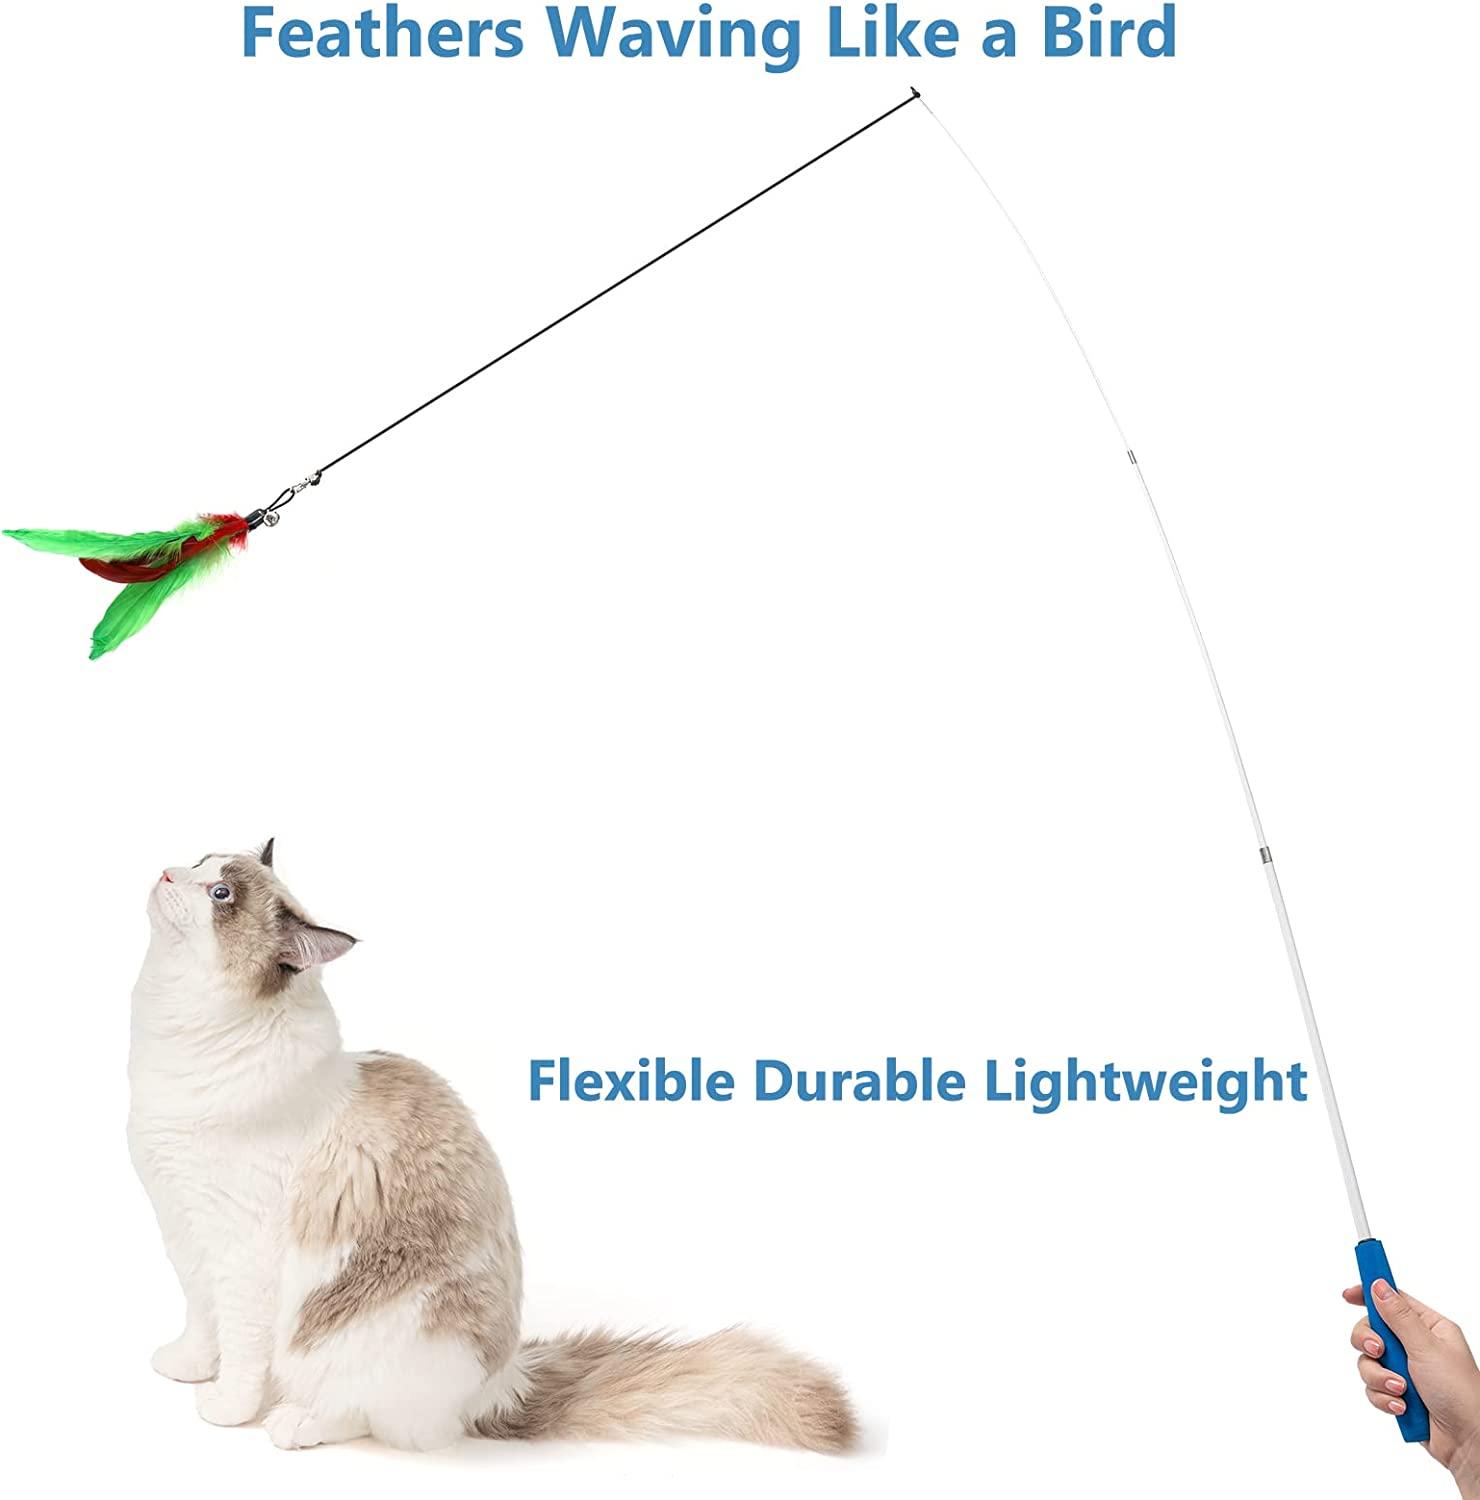 Cat Toys Kitten Toys, Interactive Cat Toy 2pcs Retractable Cat Wand Toy &  7pcs Natural Cat Feather Teaser Toys Refills, Telescopic Cat Fishing Pole  Toy for Indoor Cats Gifts, Kitty Toys for